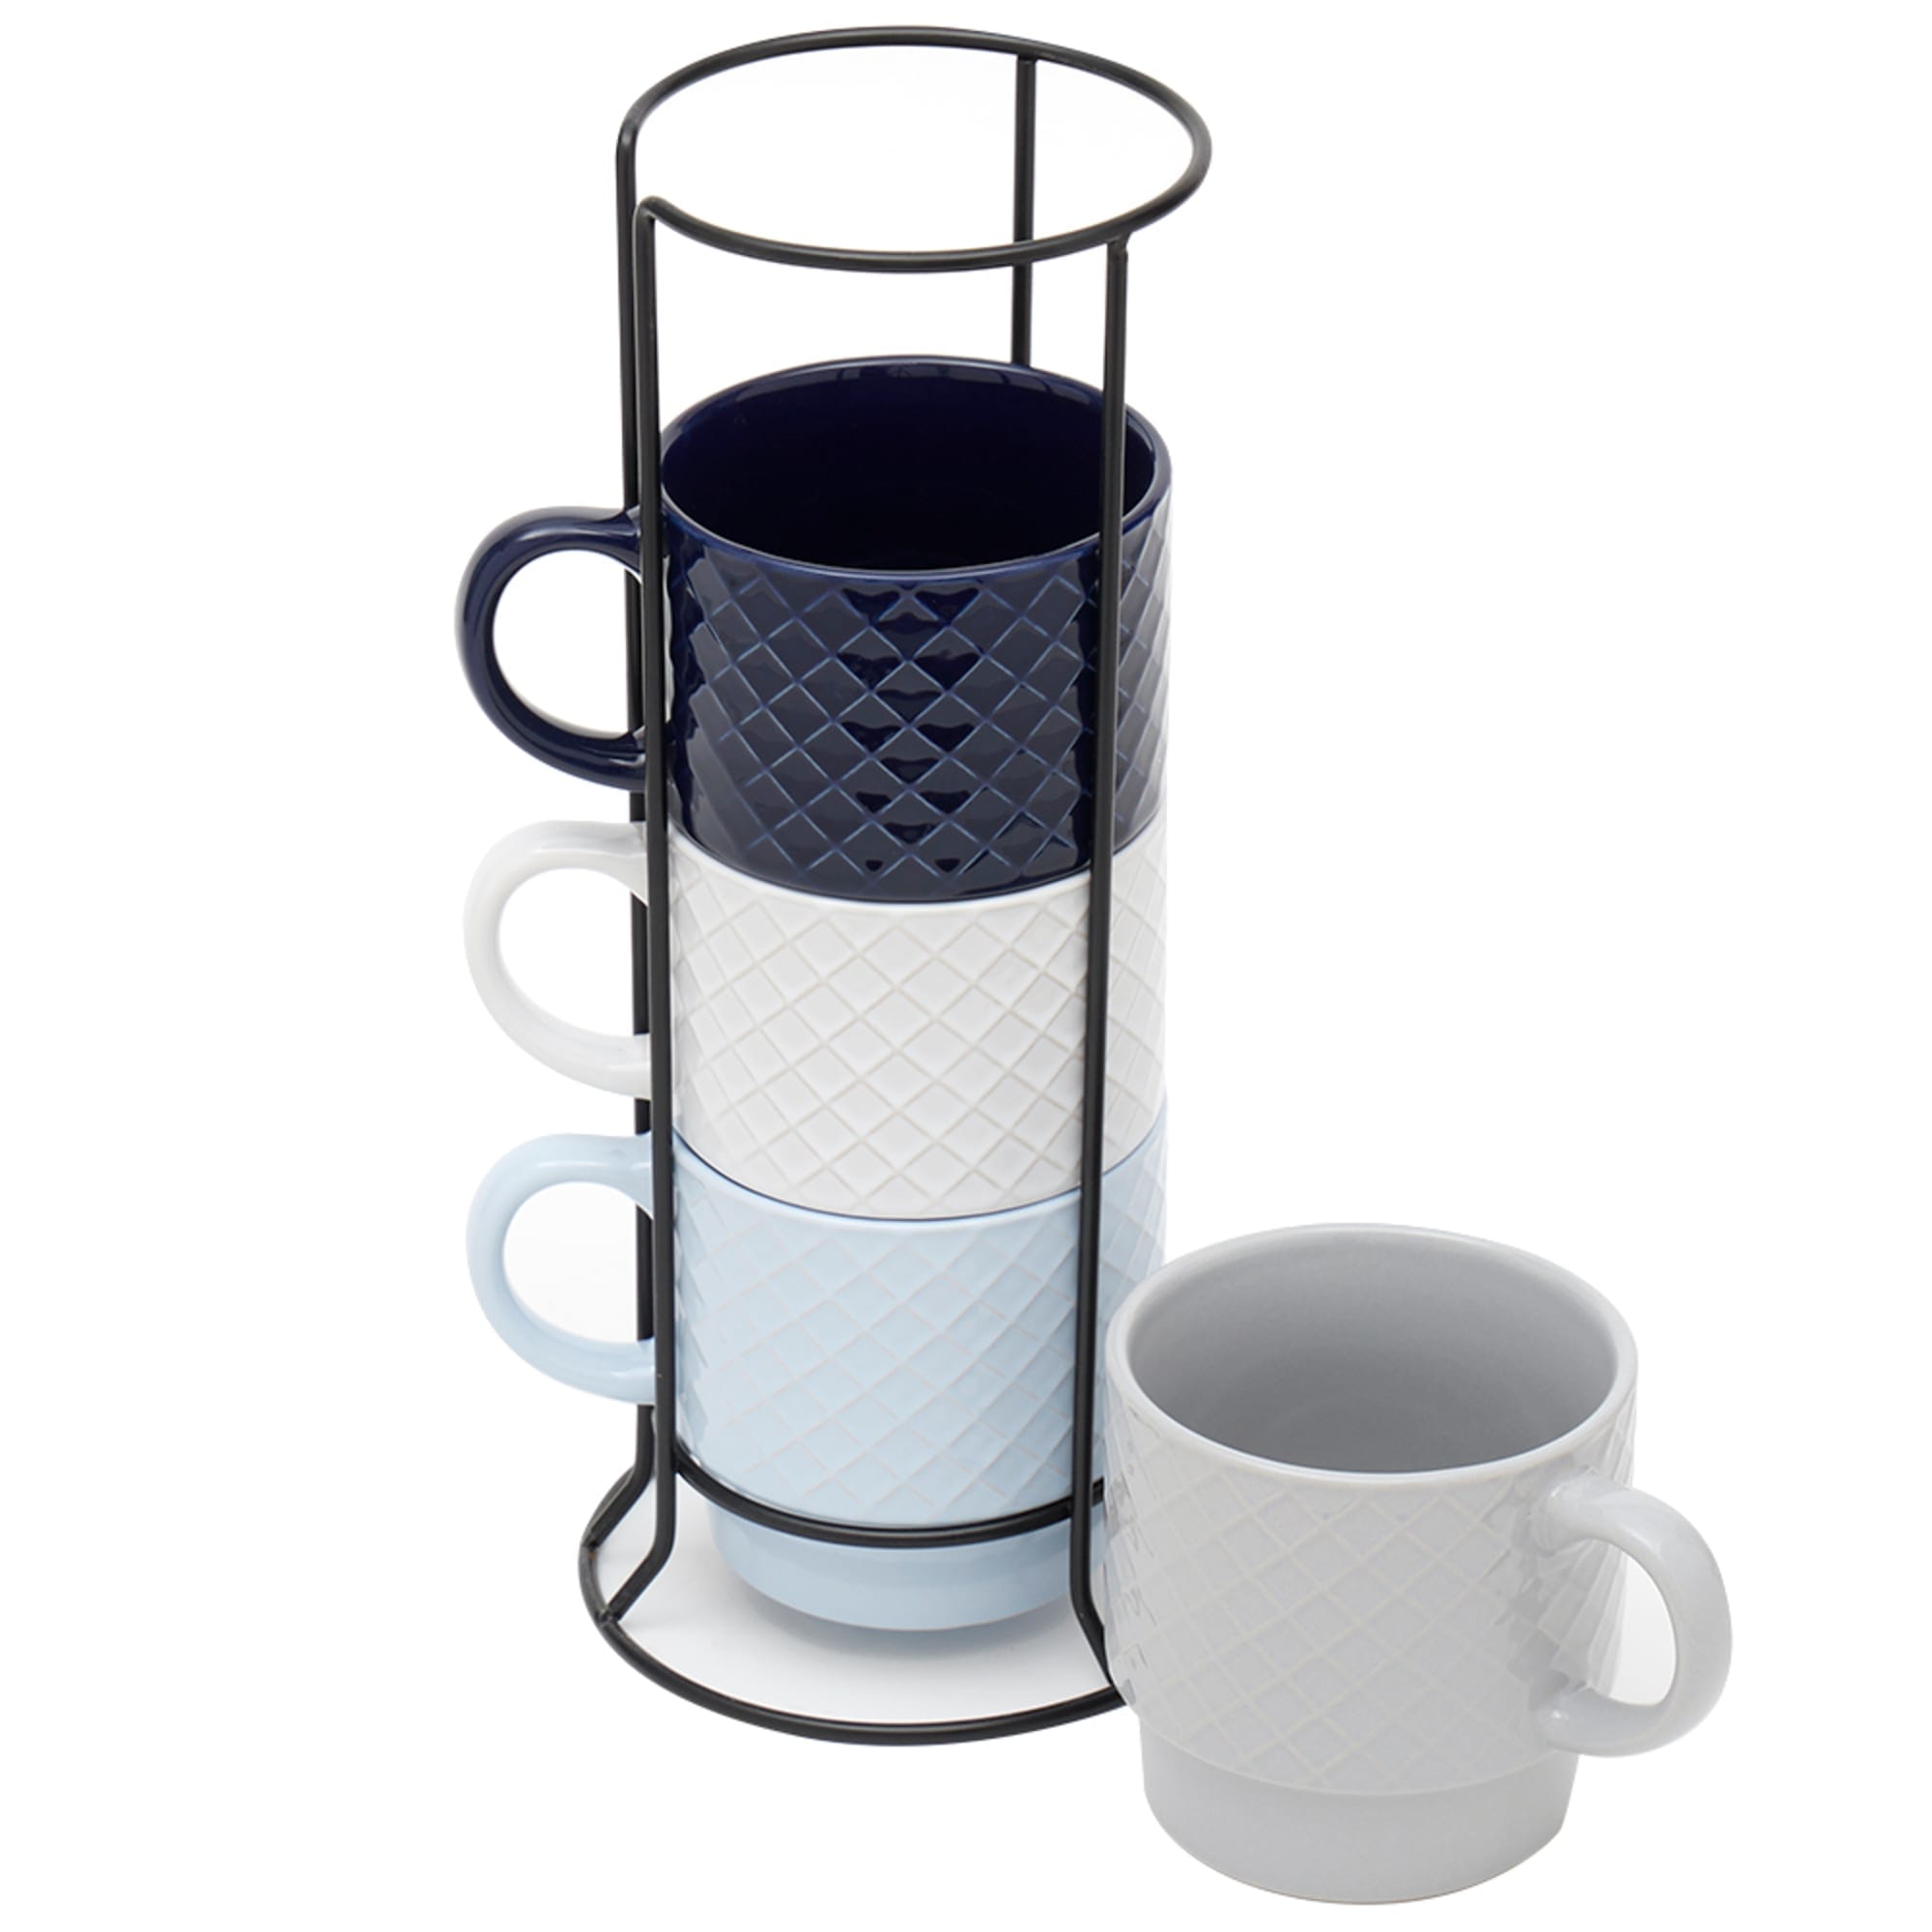 Home Basics Embossed Weave 4 Piece Stackable Mug Set with Stand
 $10.00 EACH, CASE PACK OF 6